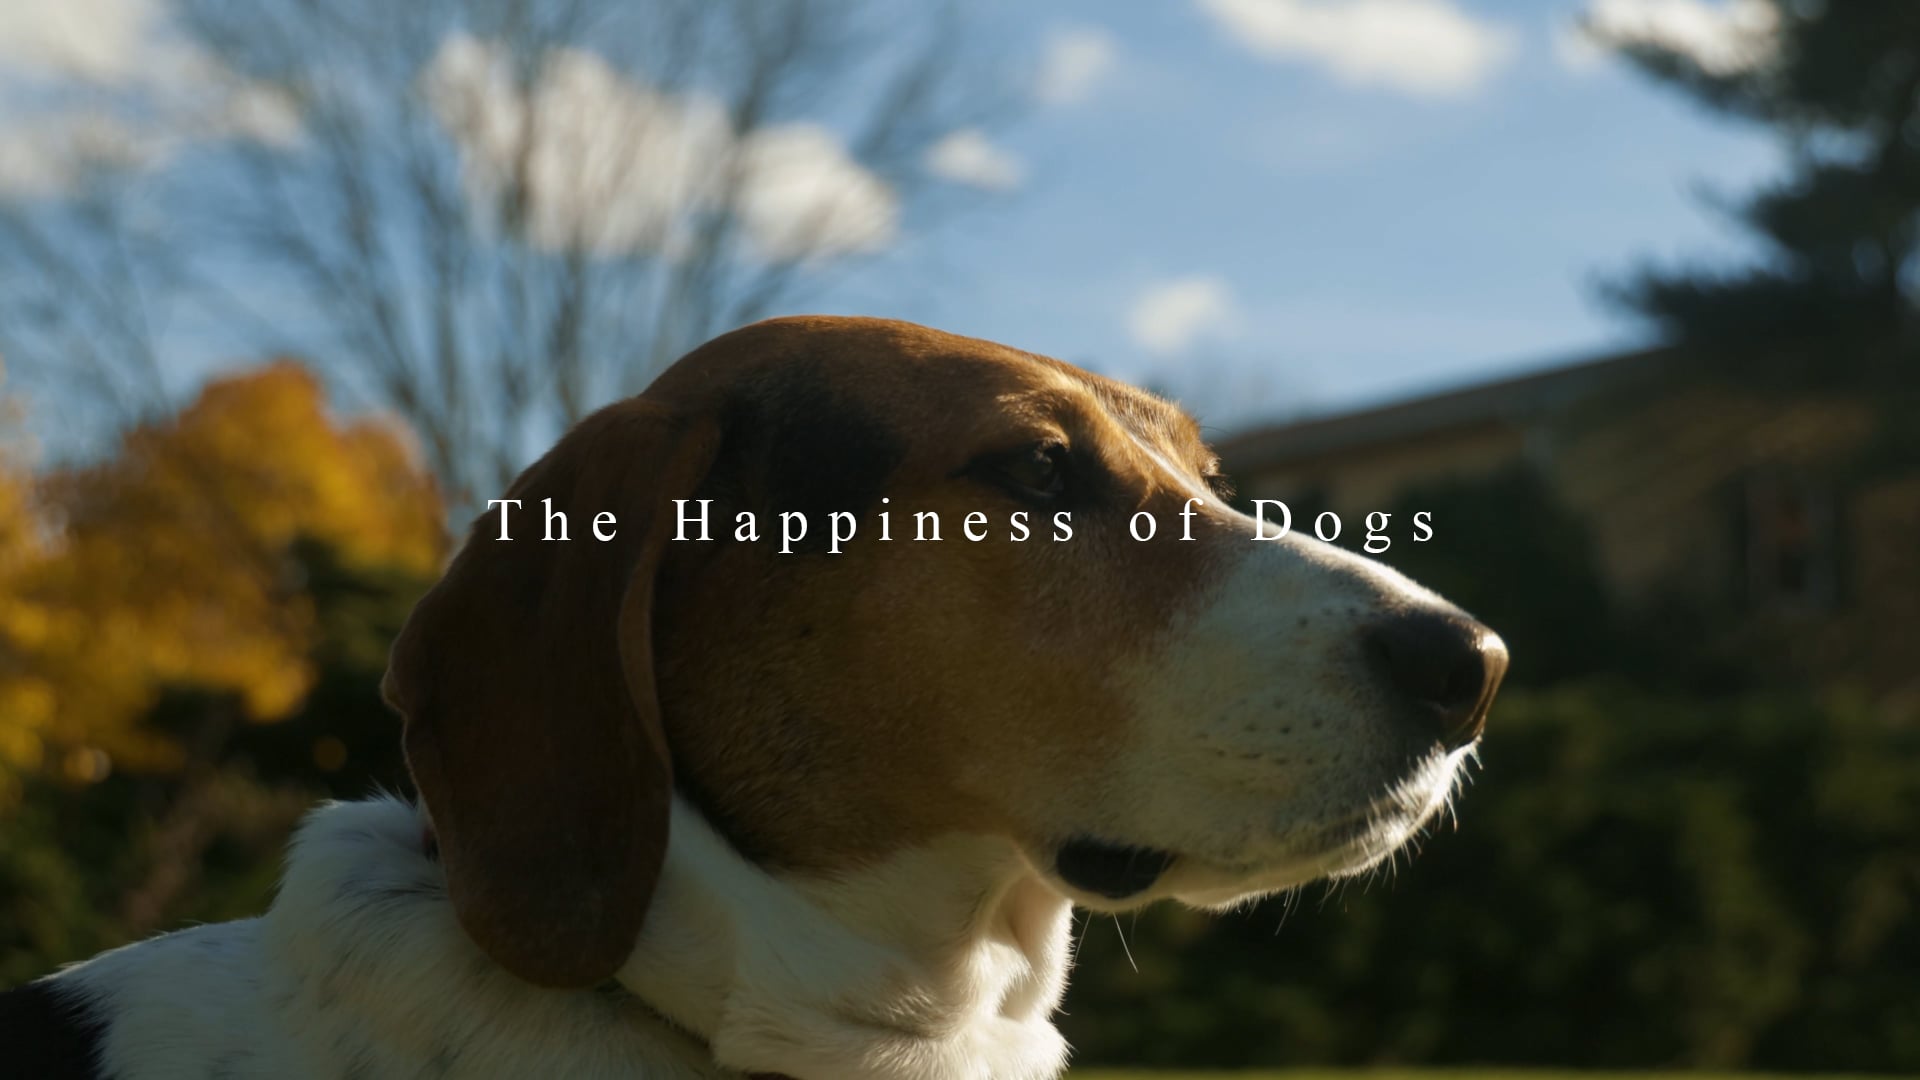 The Happiness of Dogs